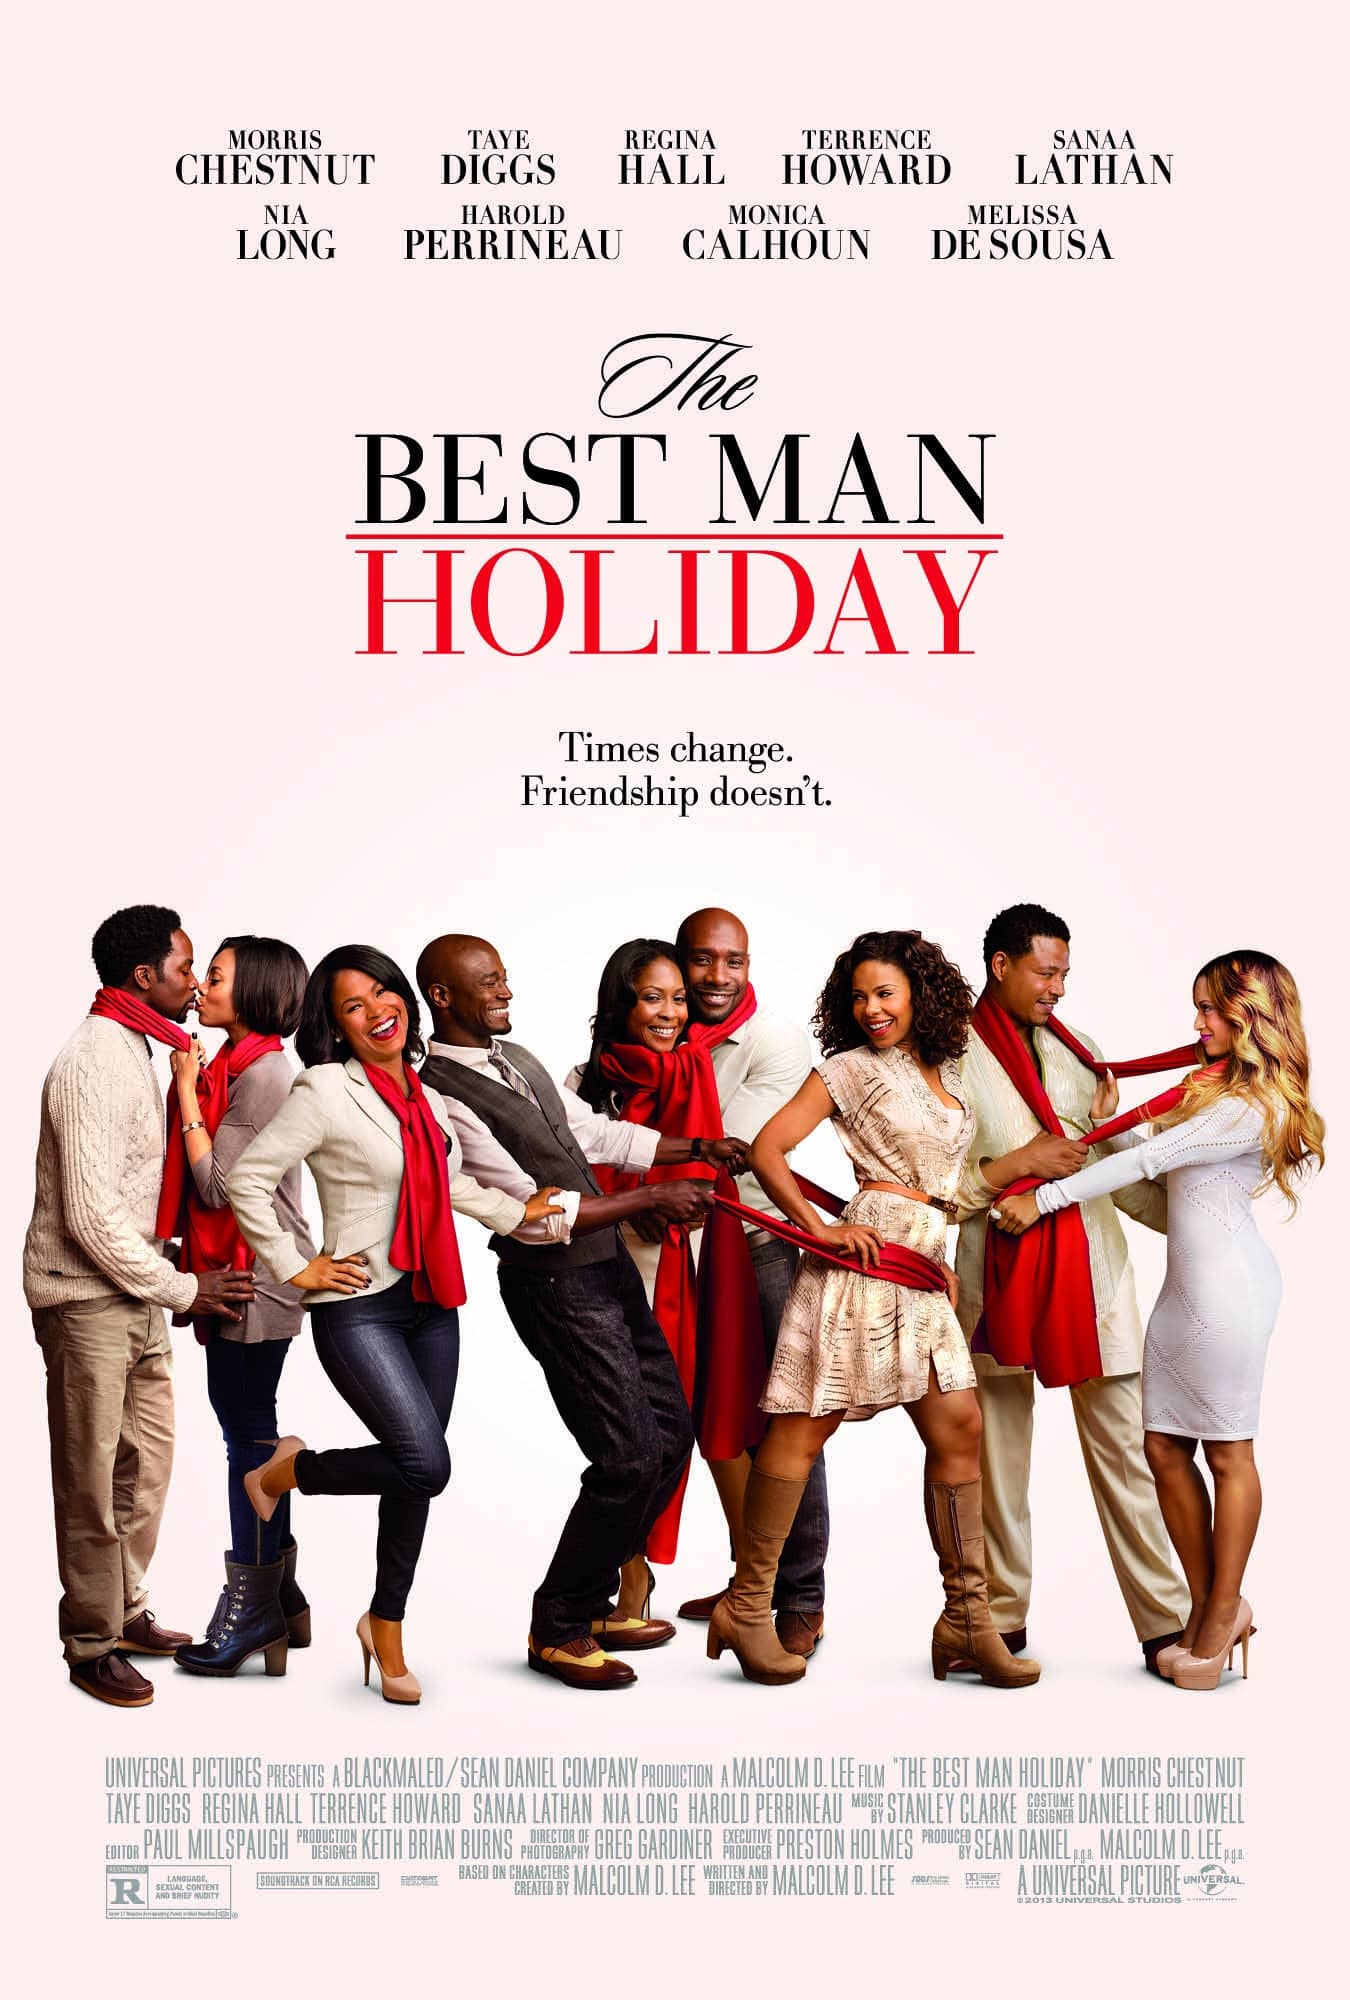 I Saw The Best Man Holiday and Here's My Review (NO SPOILERS)